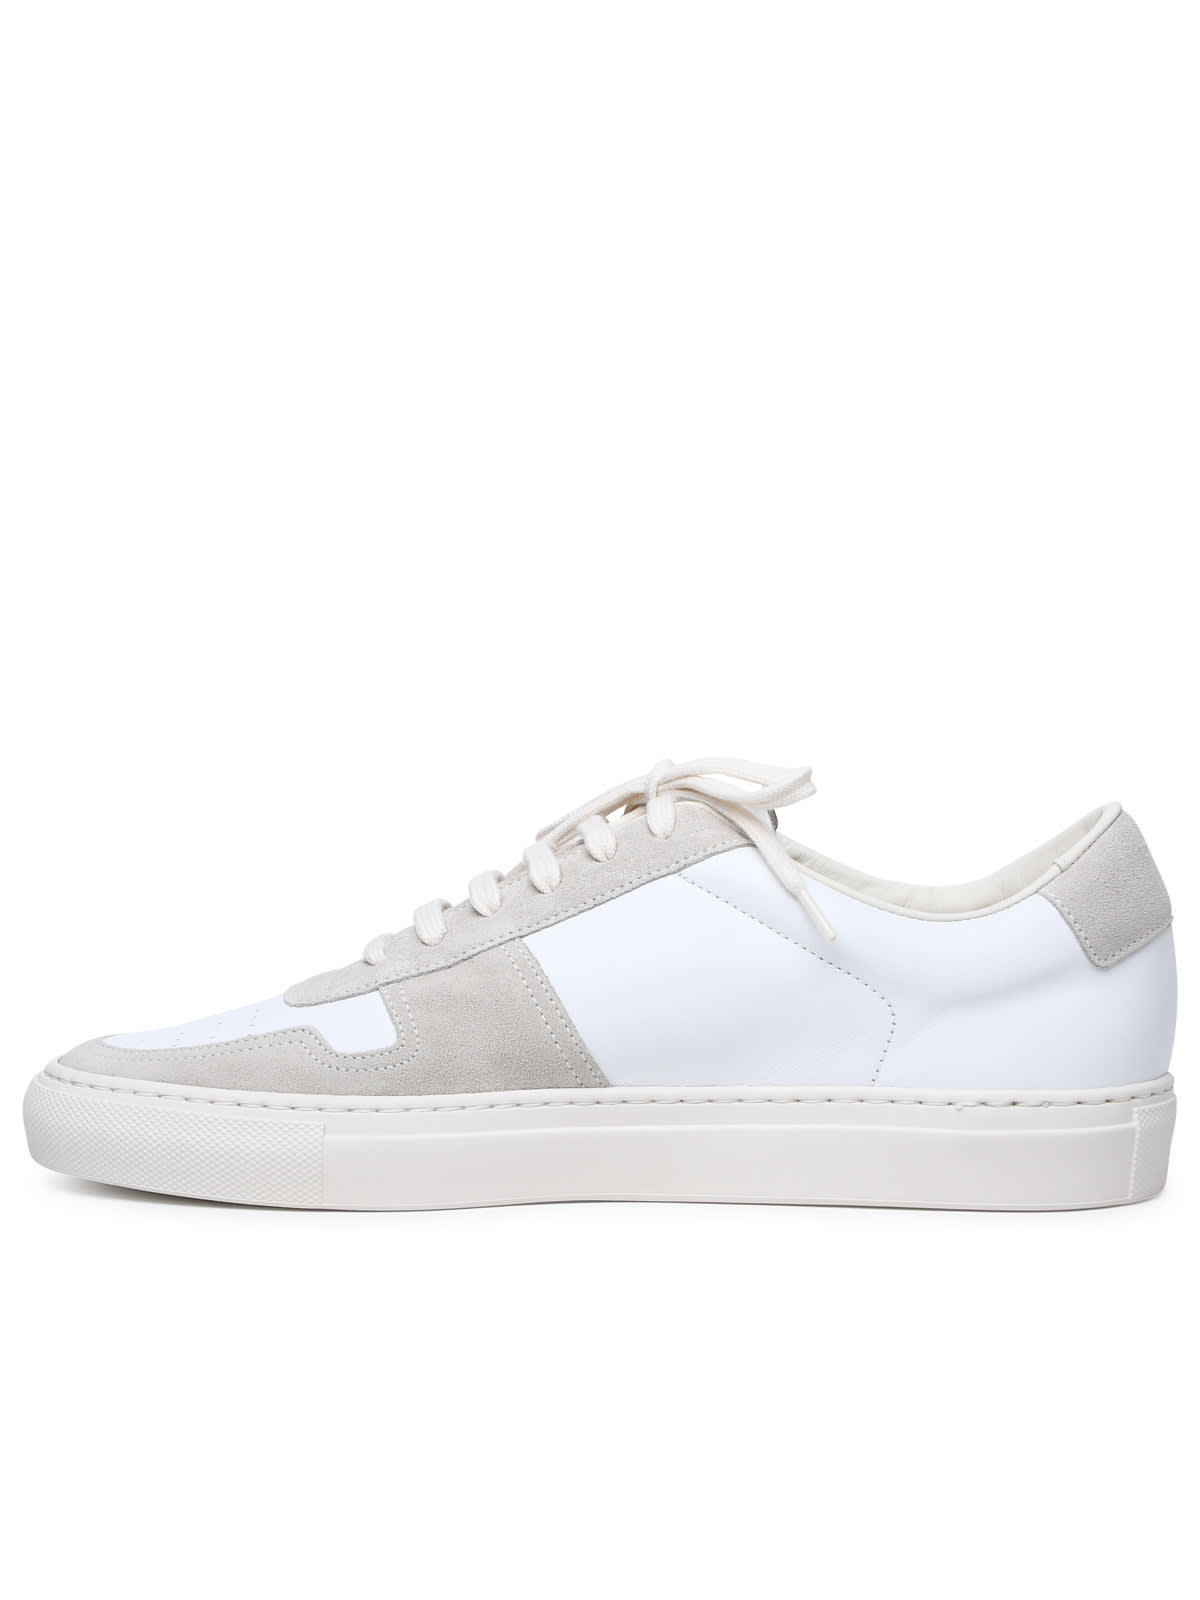 Shop Common Projects Bball Duo White Leather Sneakers